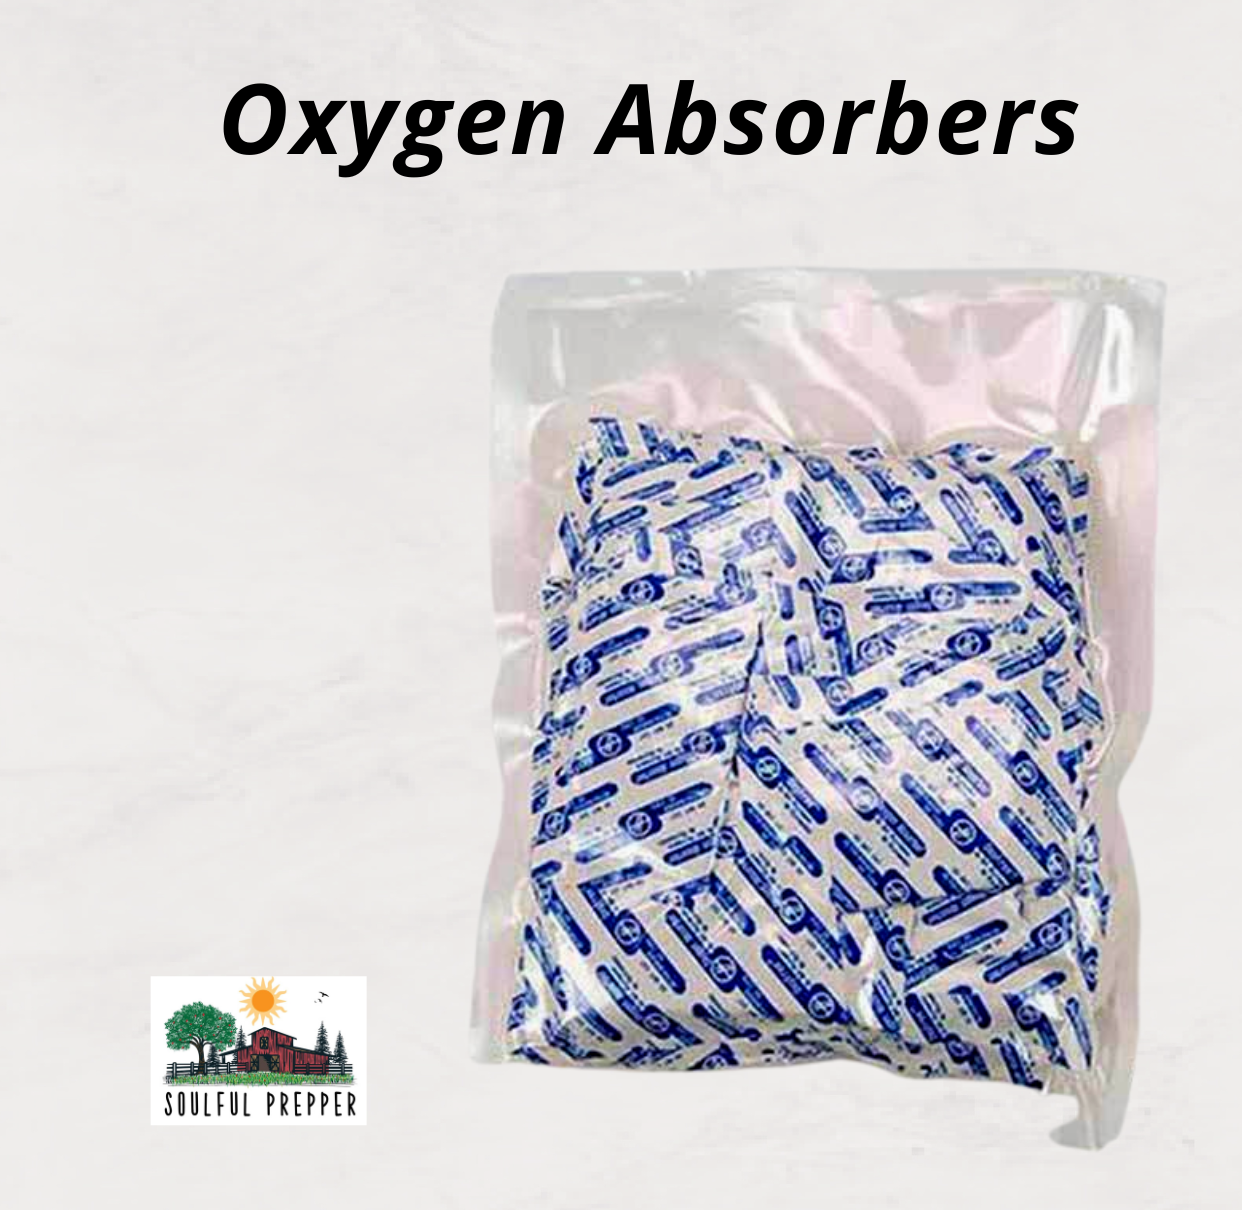 Oxygen Absorbers for storing food in mylar bags and plastic buckets